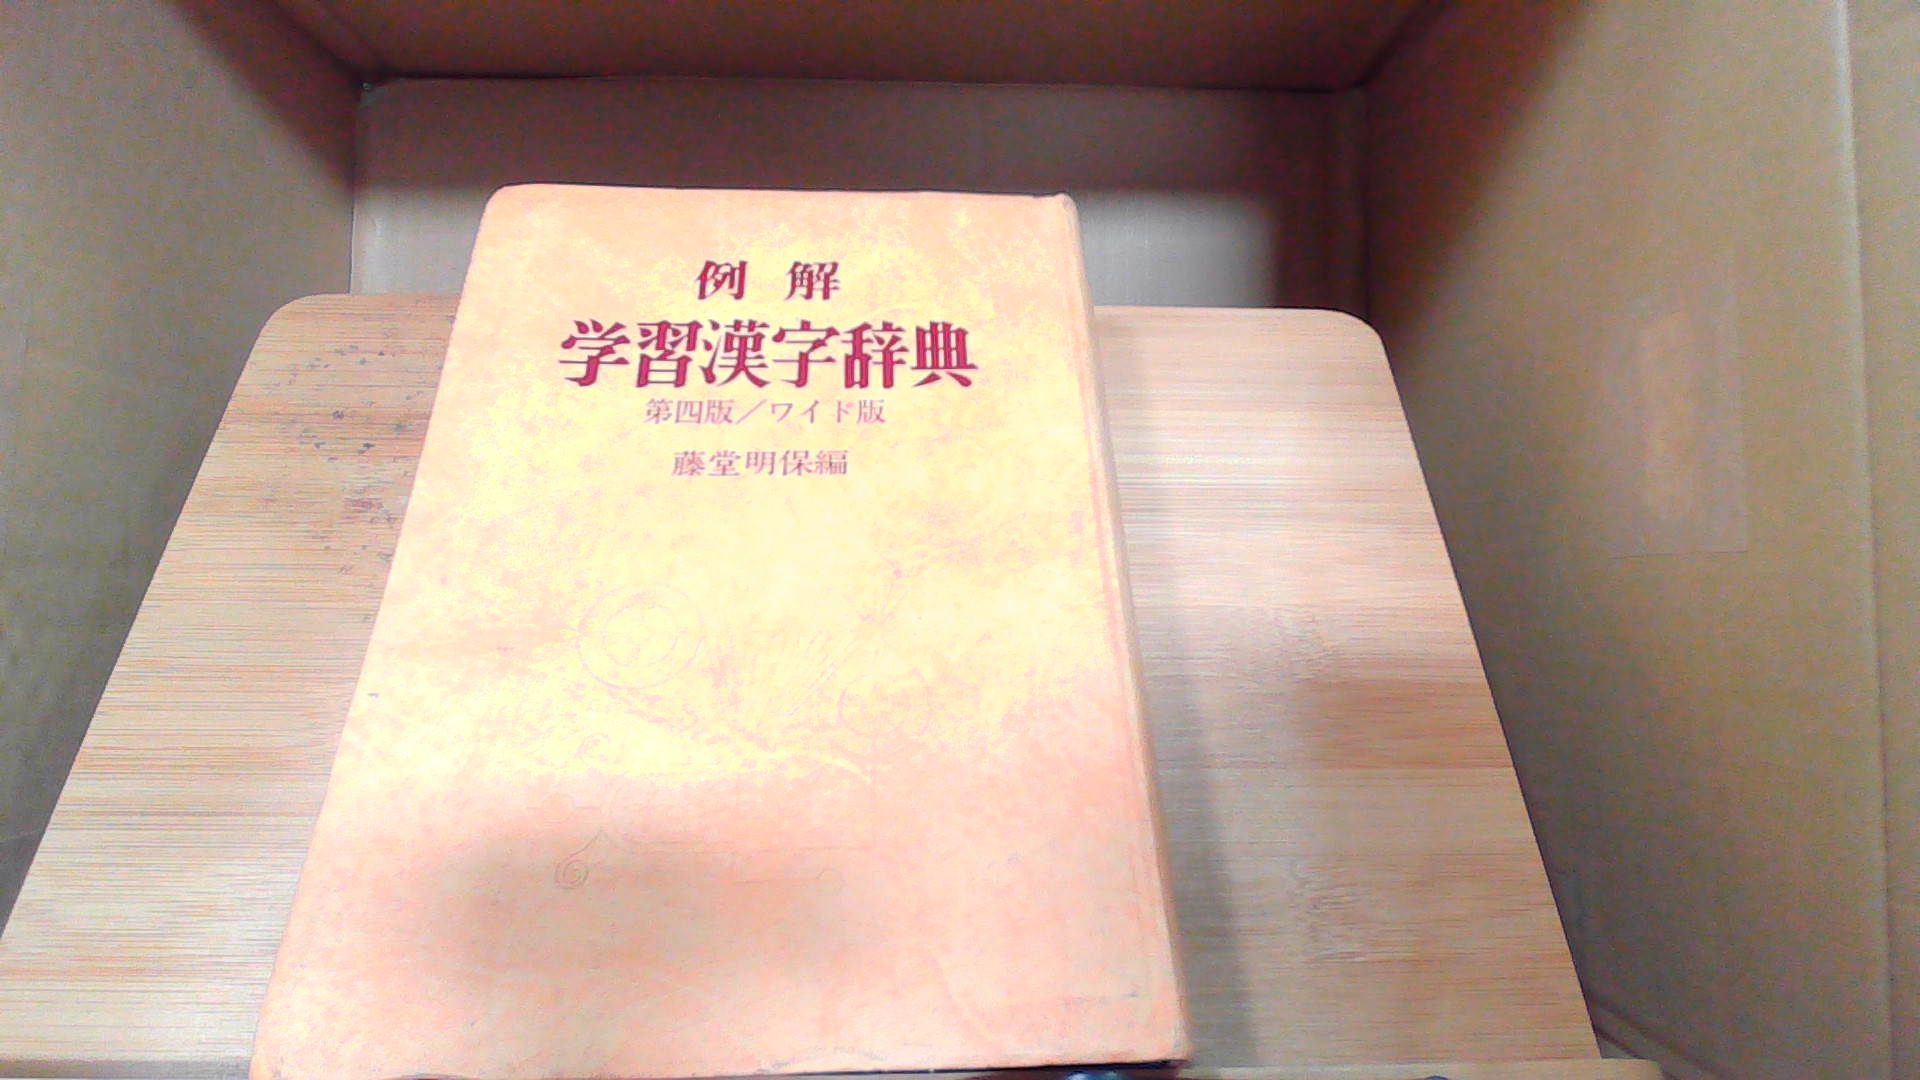  example . study Chinese character dictionary year month day issue 